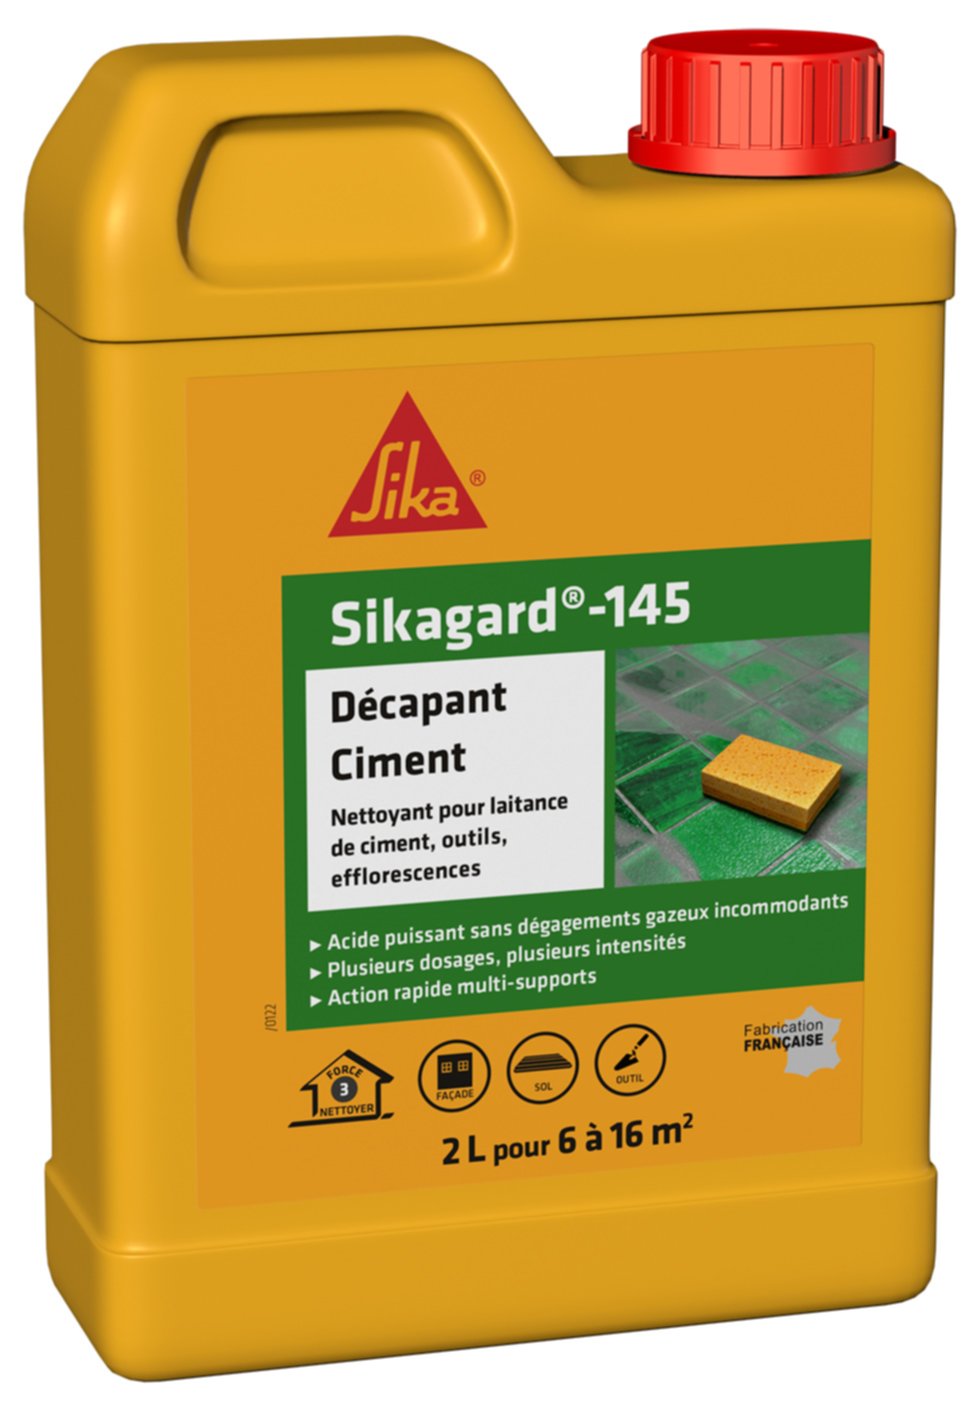 Décapant ciment Sikagard-145 2L - SIKA